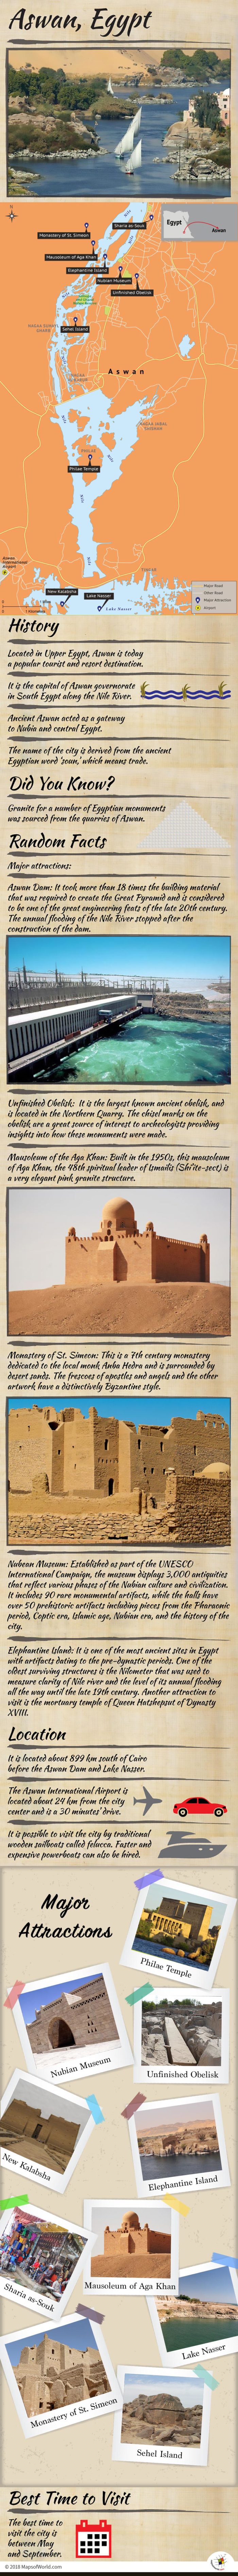 Infographic Depicting Aswan Tourist Attractions